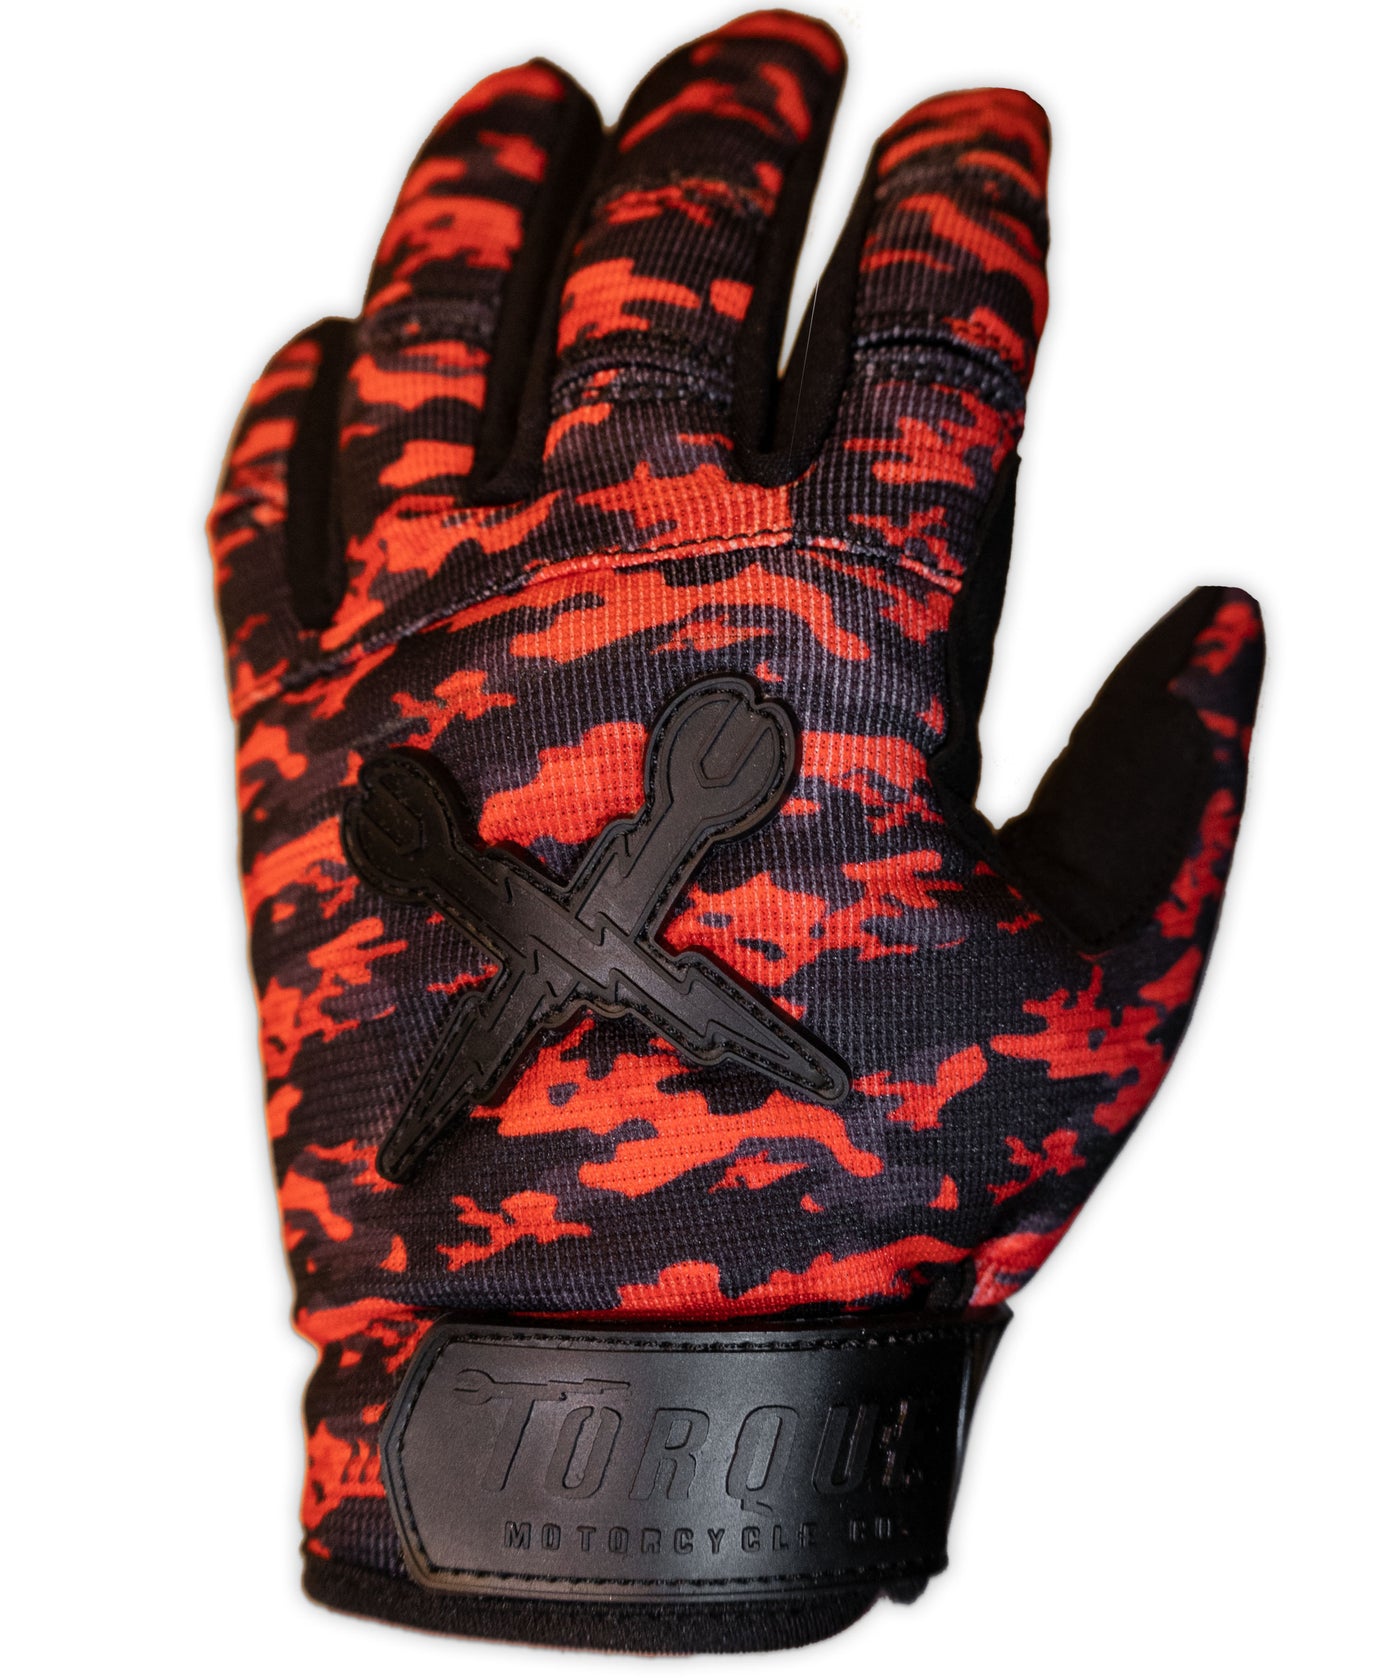 back view of moto gloves with red camo pattern.  Torque logo on back as well.